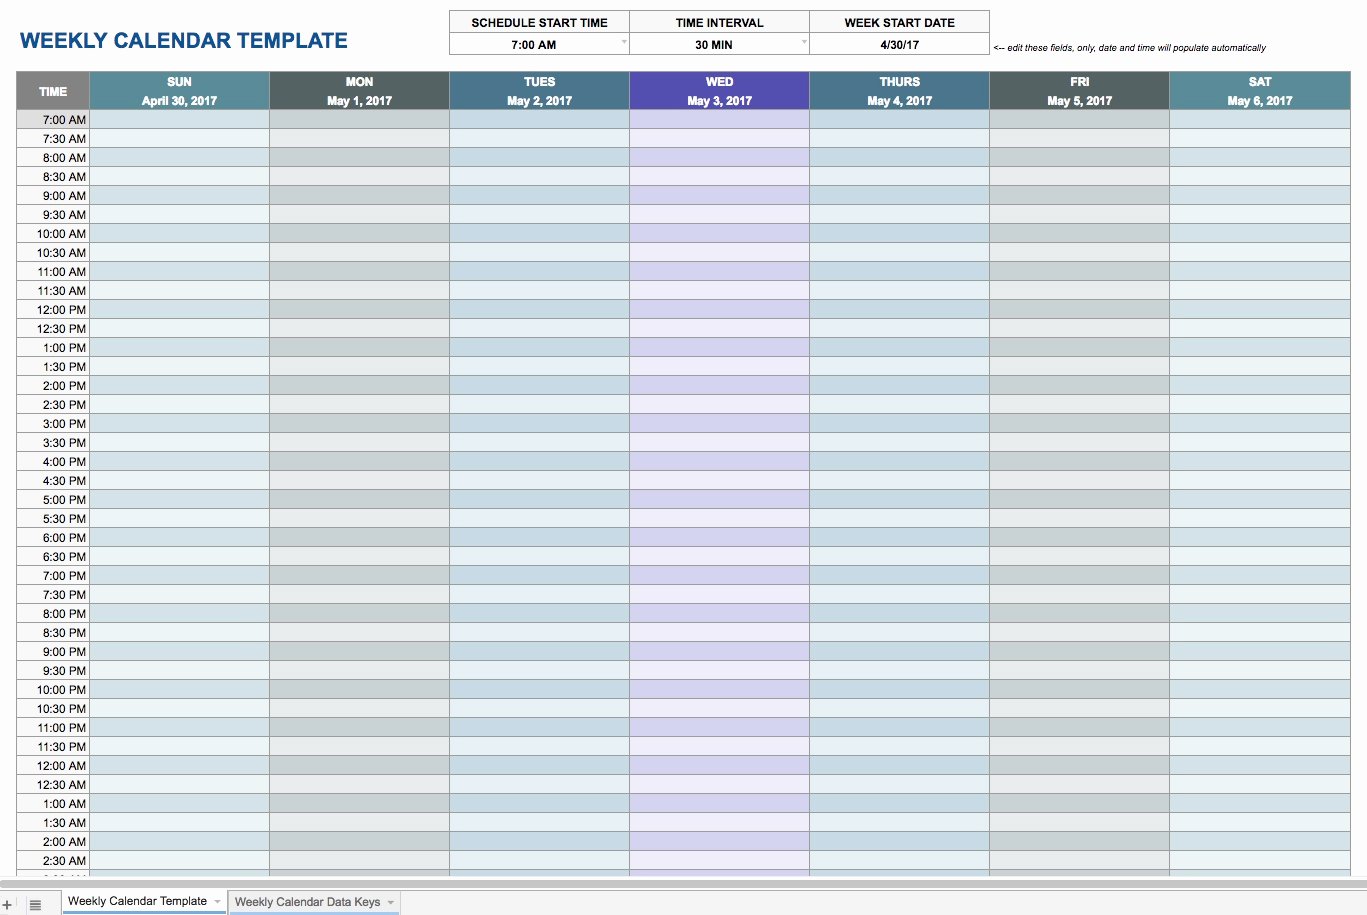 Appointment Schedule Template 15 Minute Increments